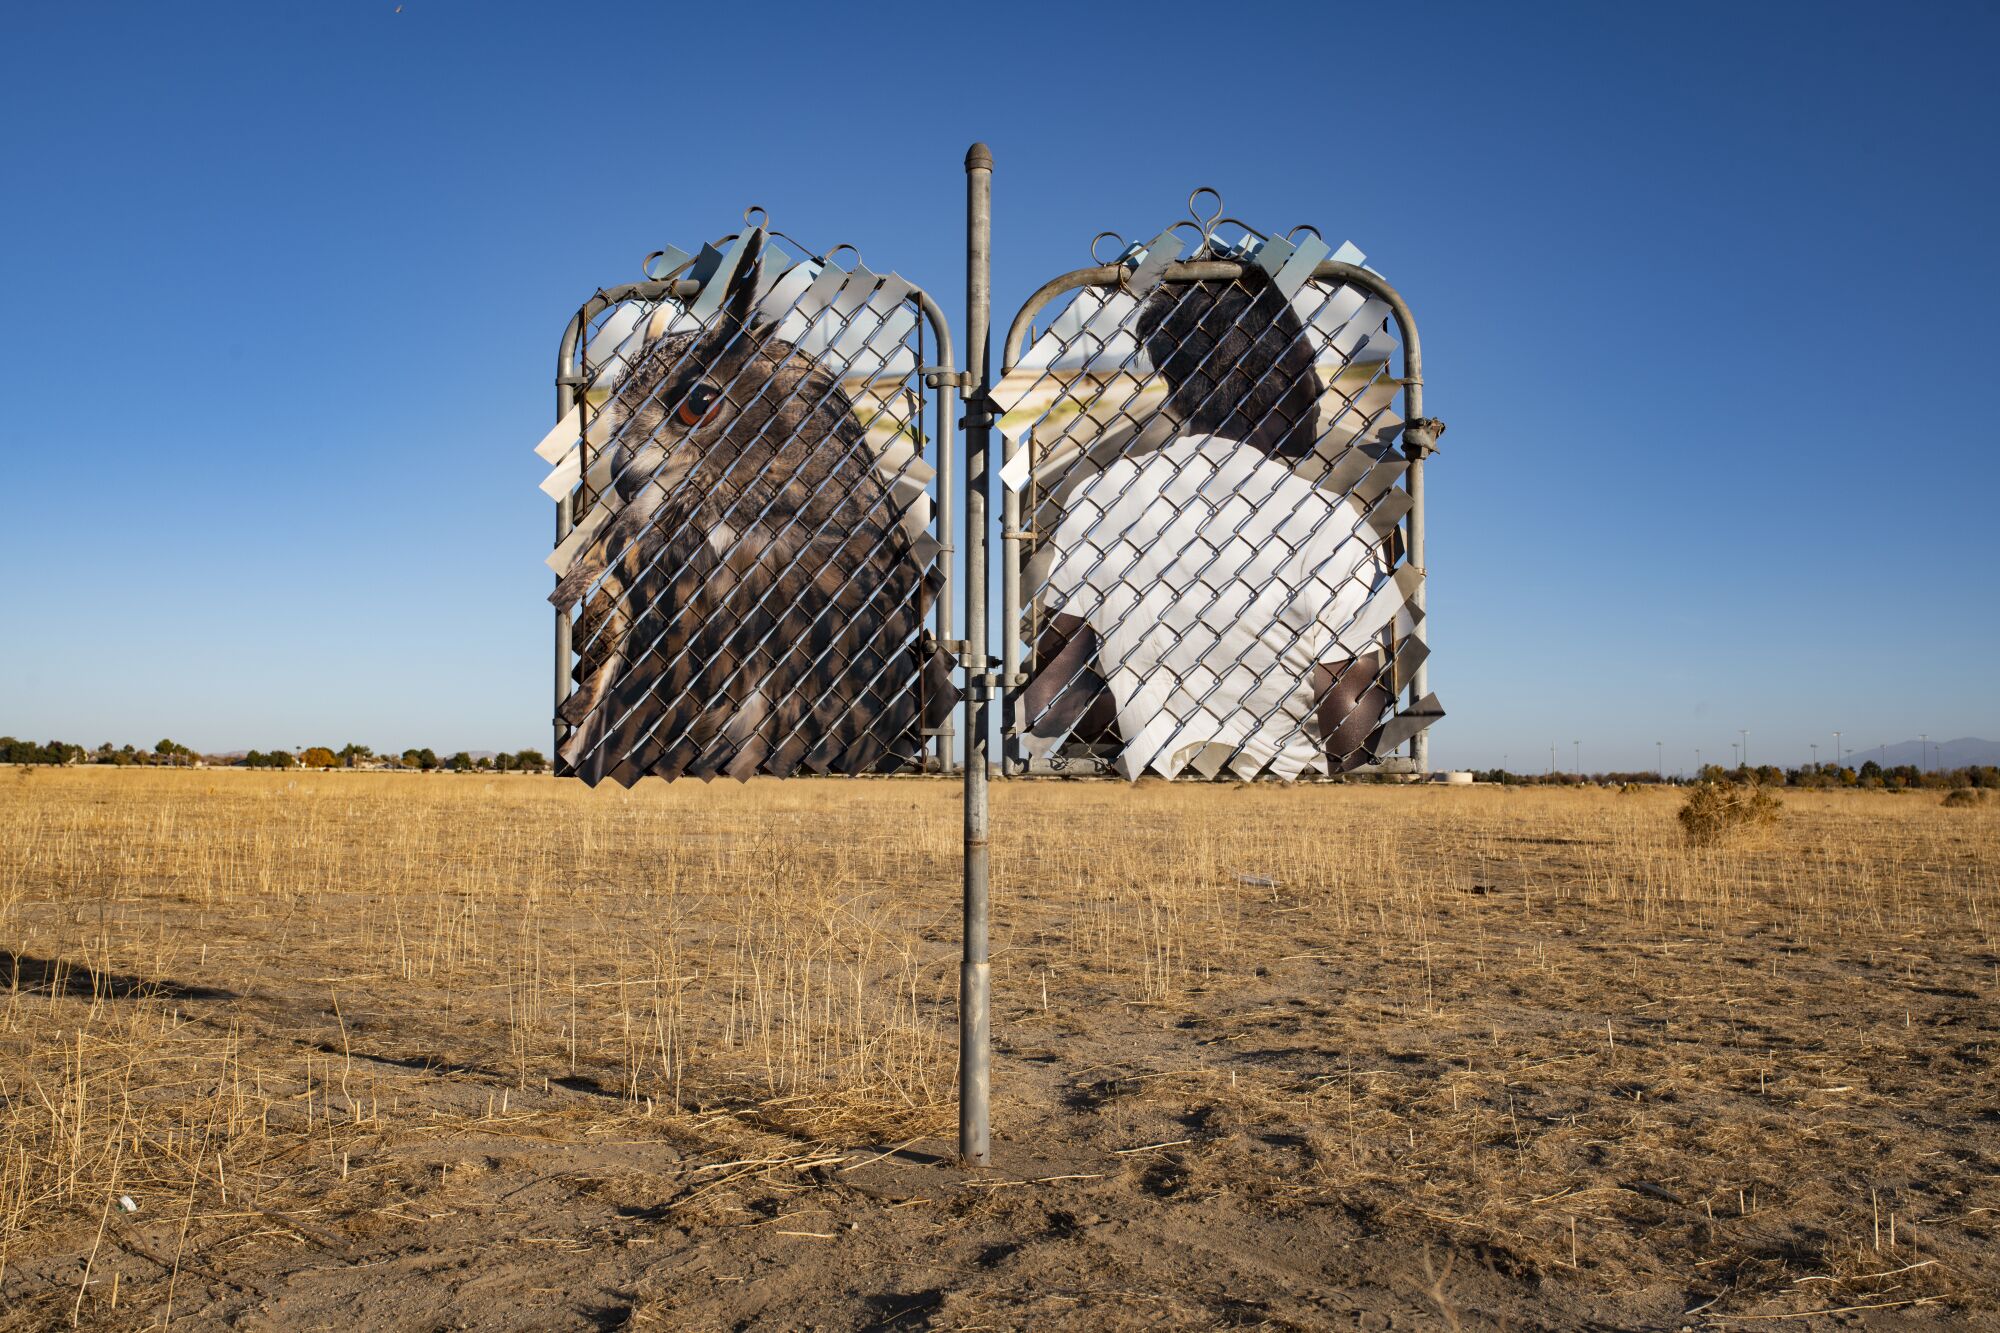 Two portraits, of a great horned owl and a man, under chain link mesh, mounted on a pole in an empty field